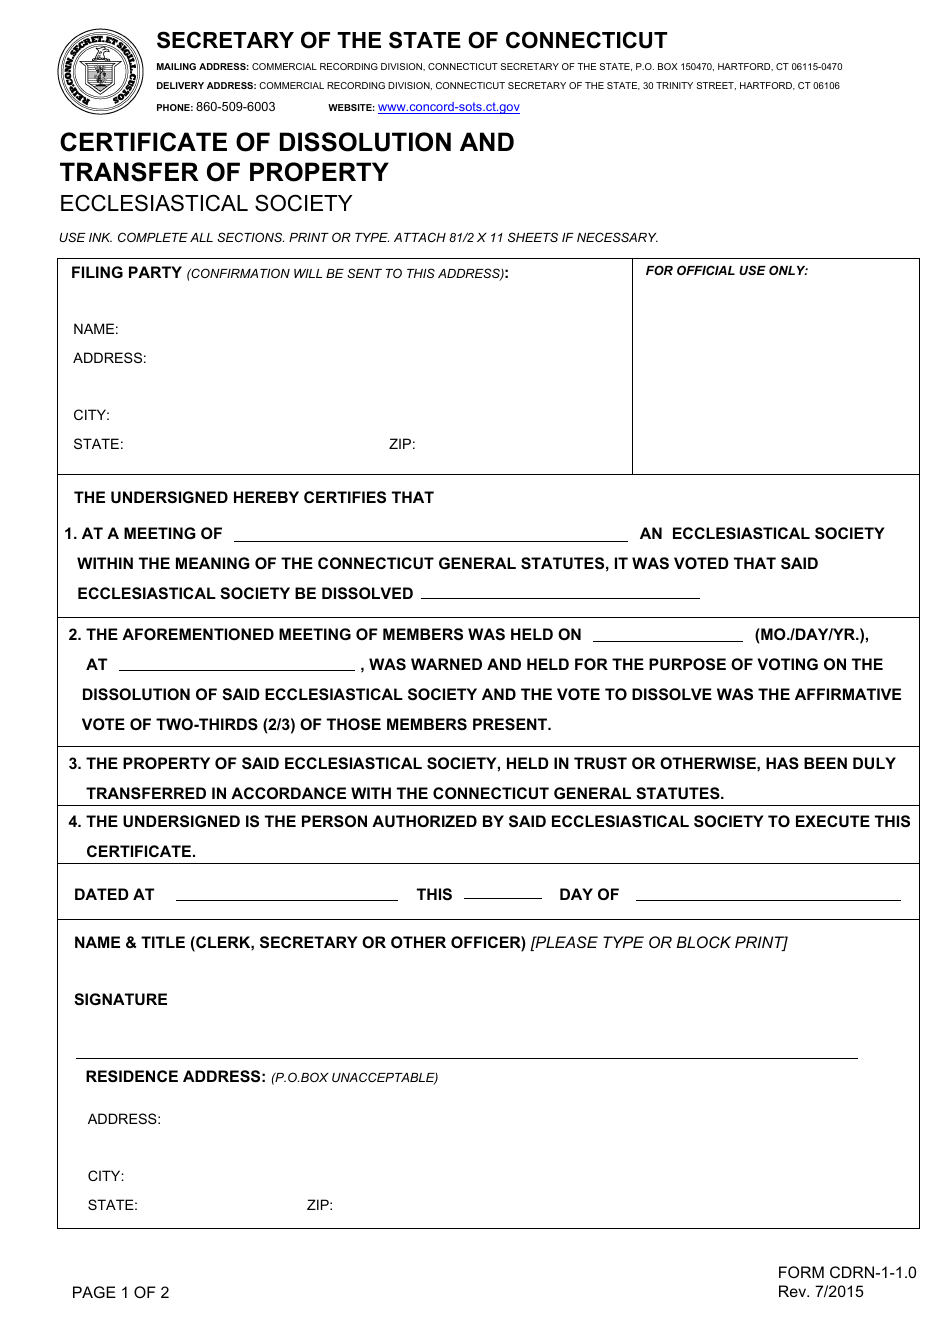 Form CDRN-1-1.0 Certificate of Dissolution and Transfer of Property - Ecclesiastical Society - Connecticut, Page 1